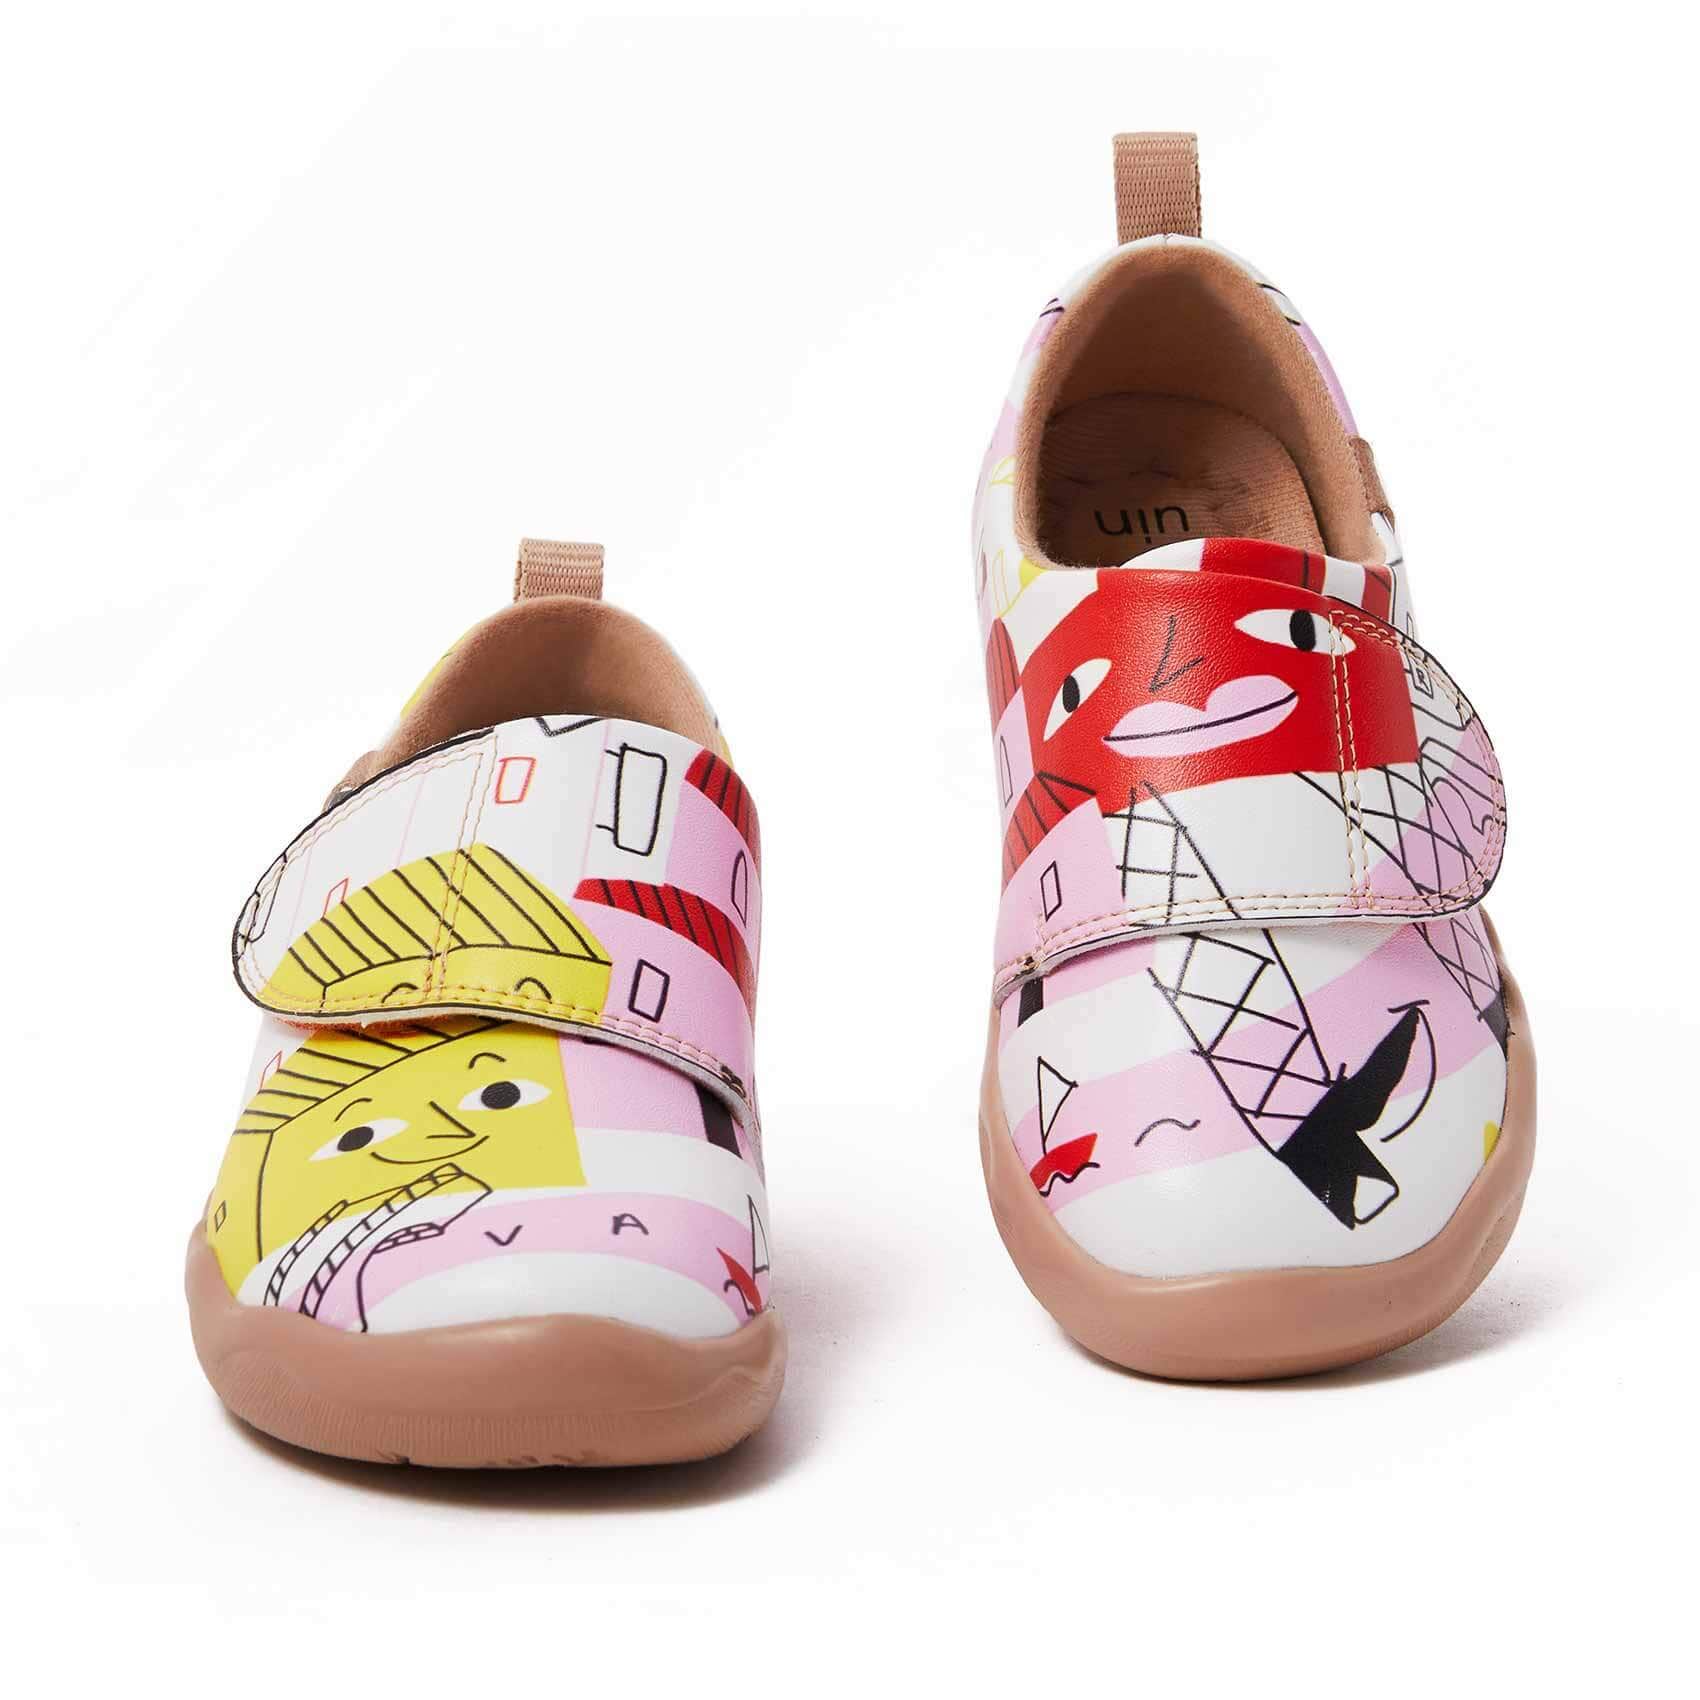 UIN Footwear Kid Building My Dream House Kid Canvas loafers